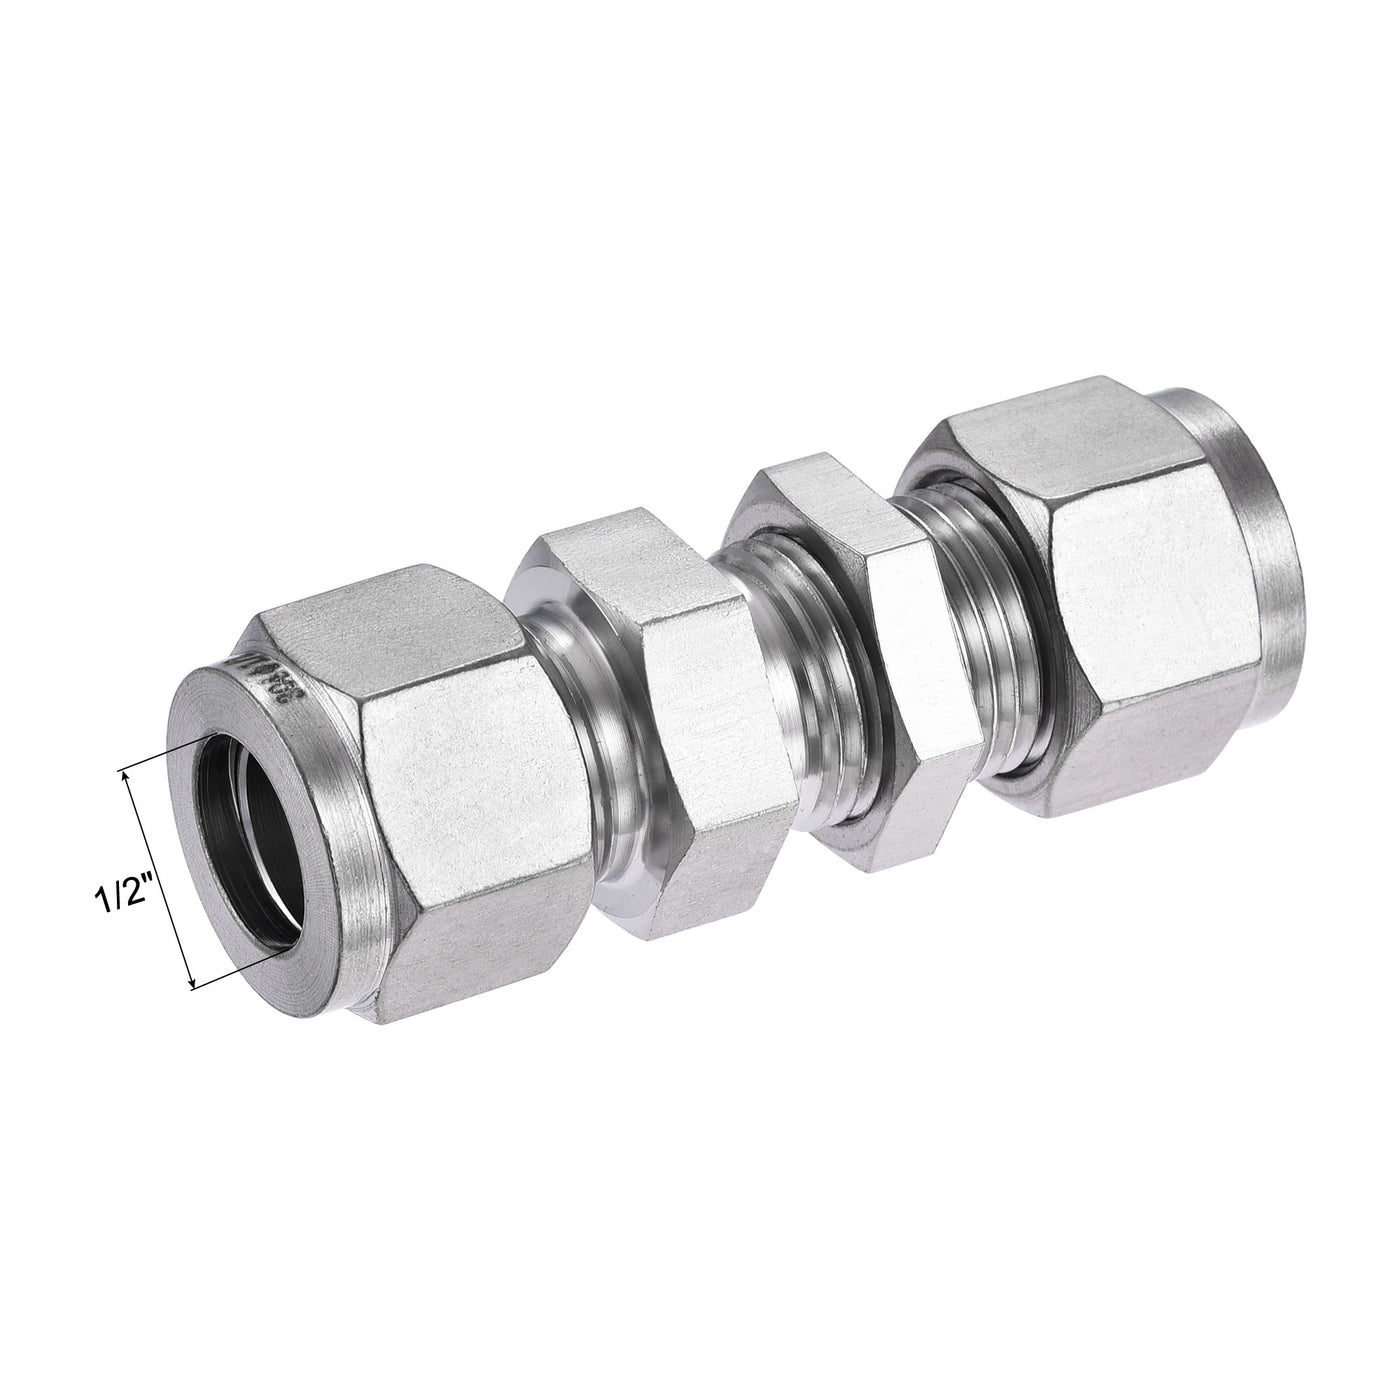 Uxcell Uxcell Compression Tube Fitting 3/8" Tube OD x 3/8" Tube OD Bulkhead Union Coupling Adapter 304 Stainless Steel